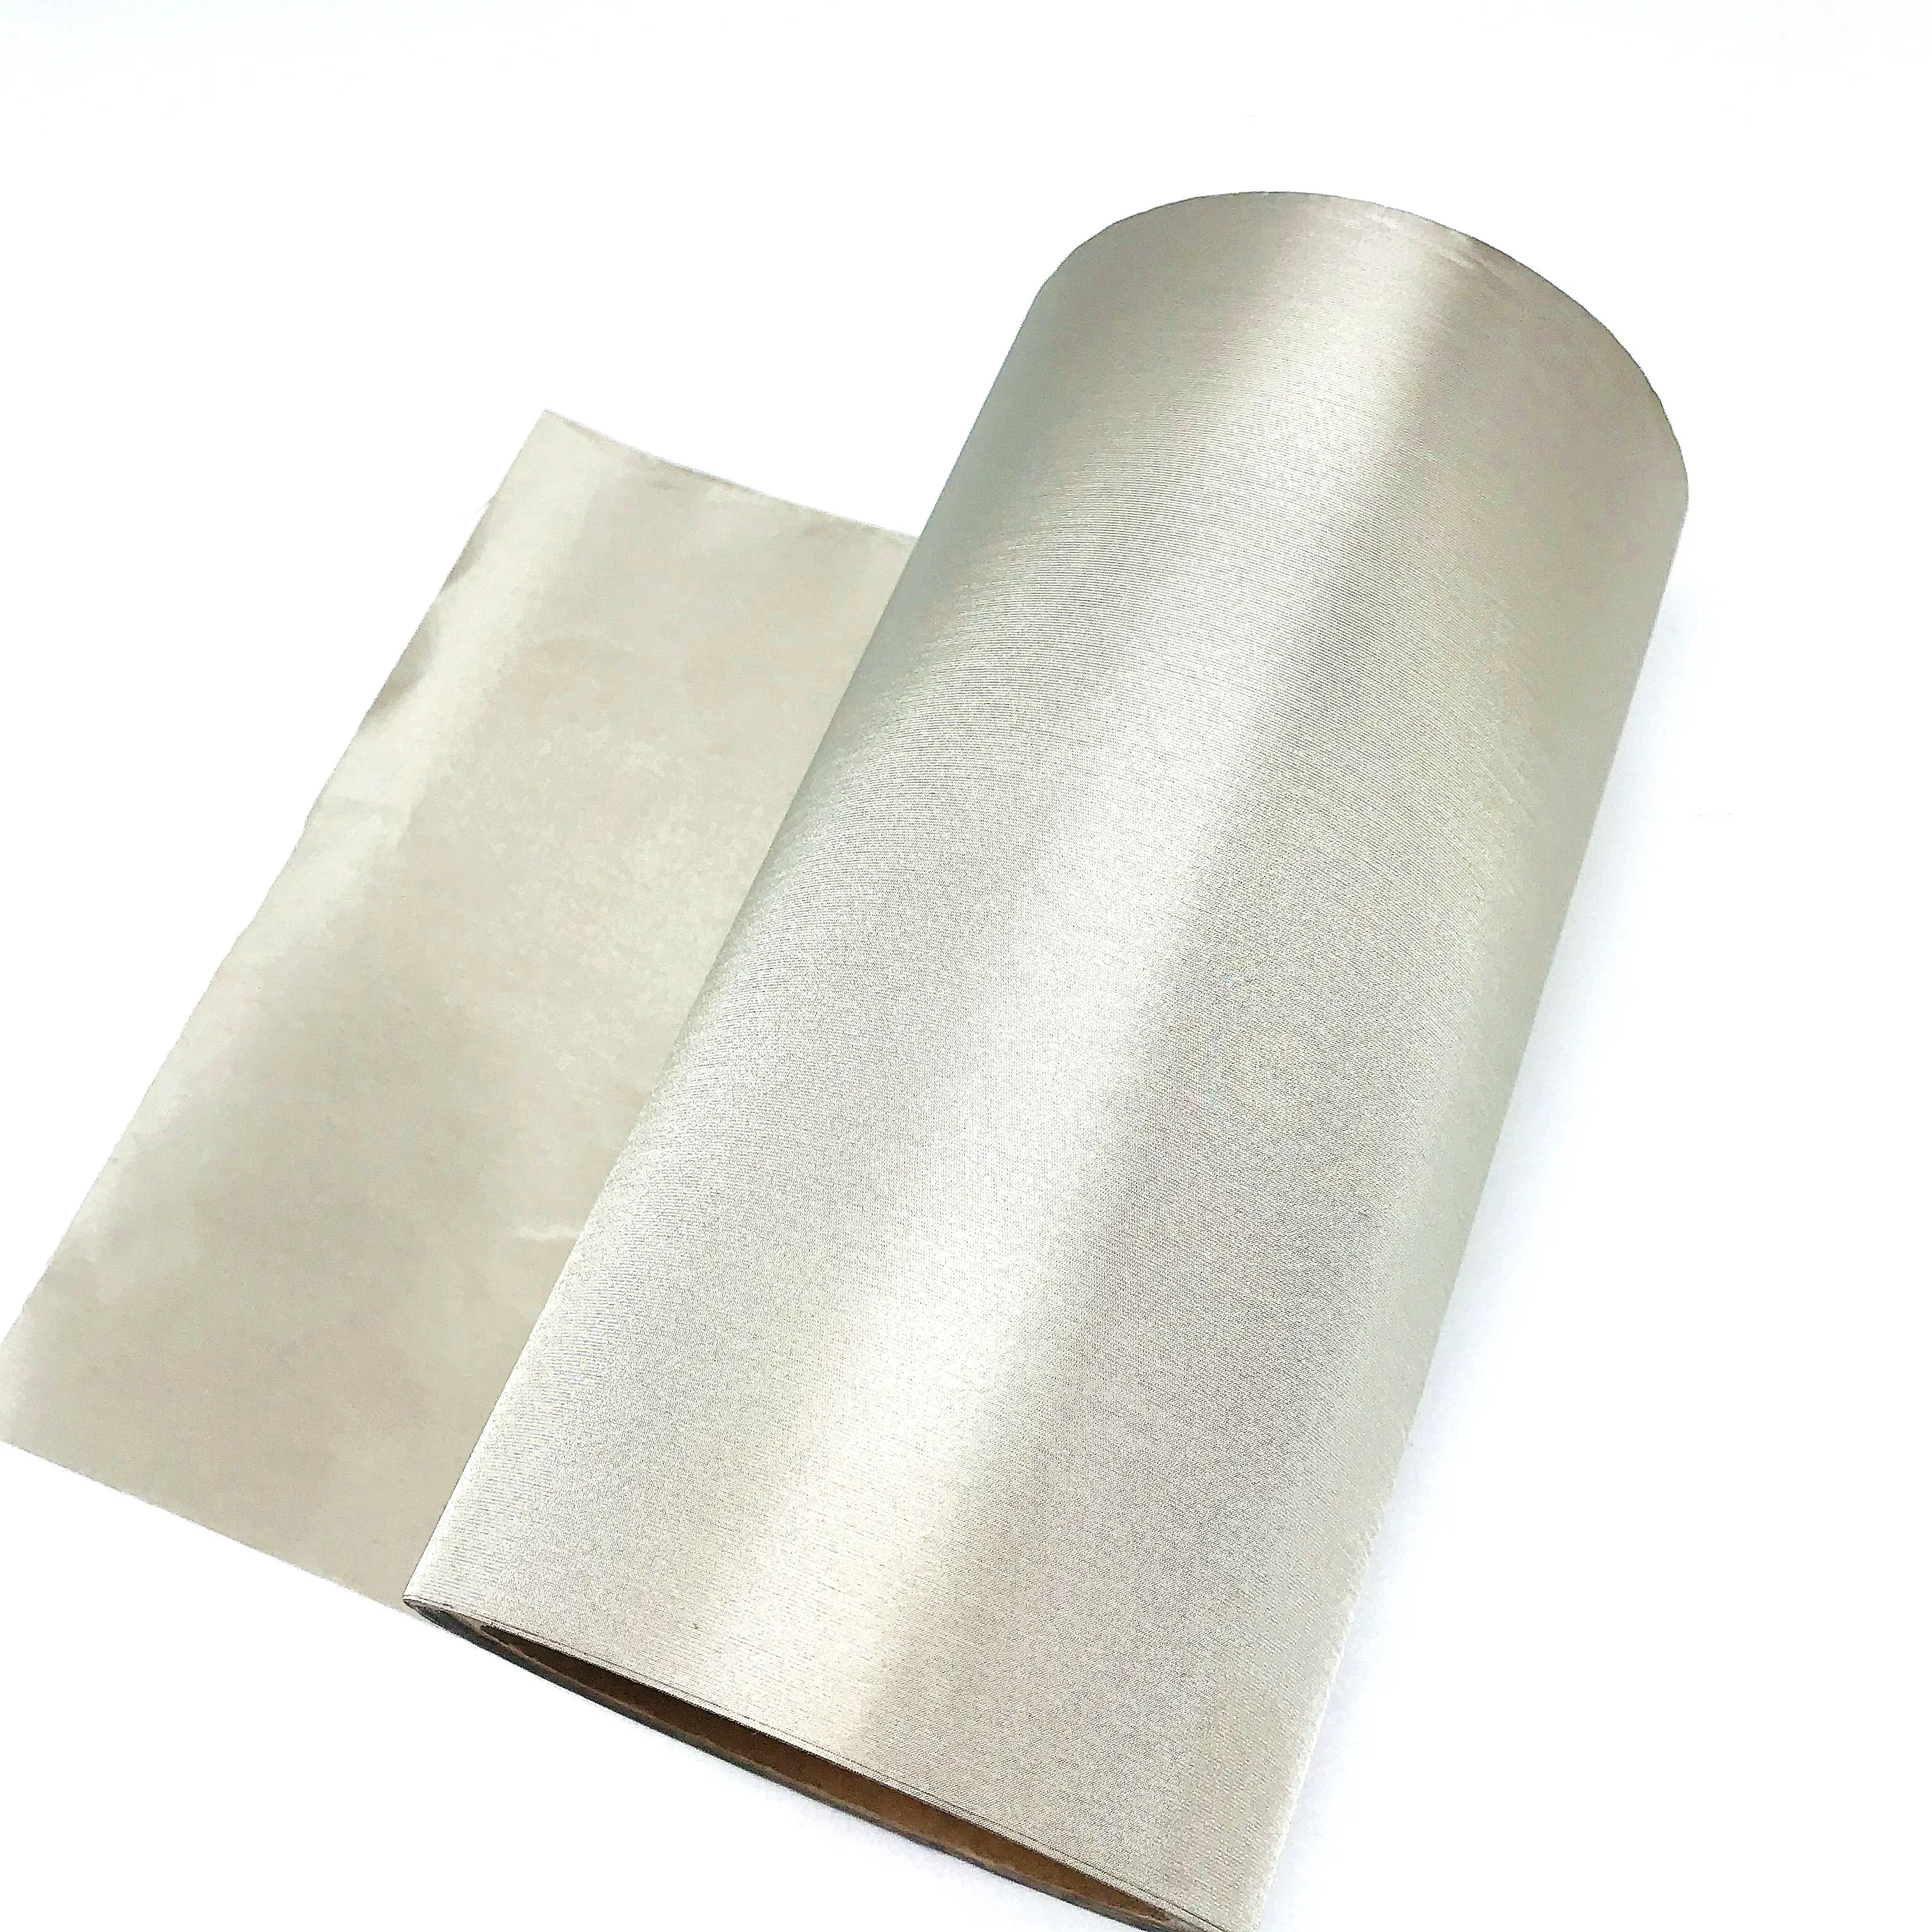 EMI Shielding Double Sided Conductive Copper Foil electricity conductive double sided tape